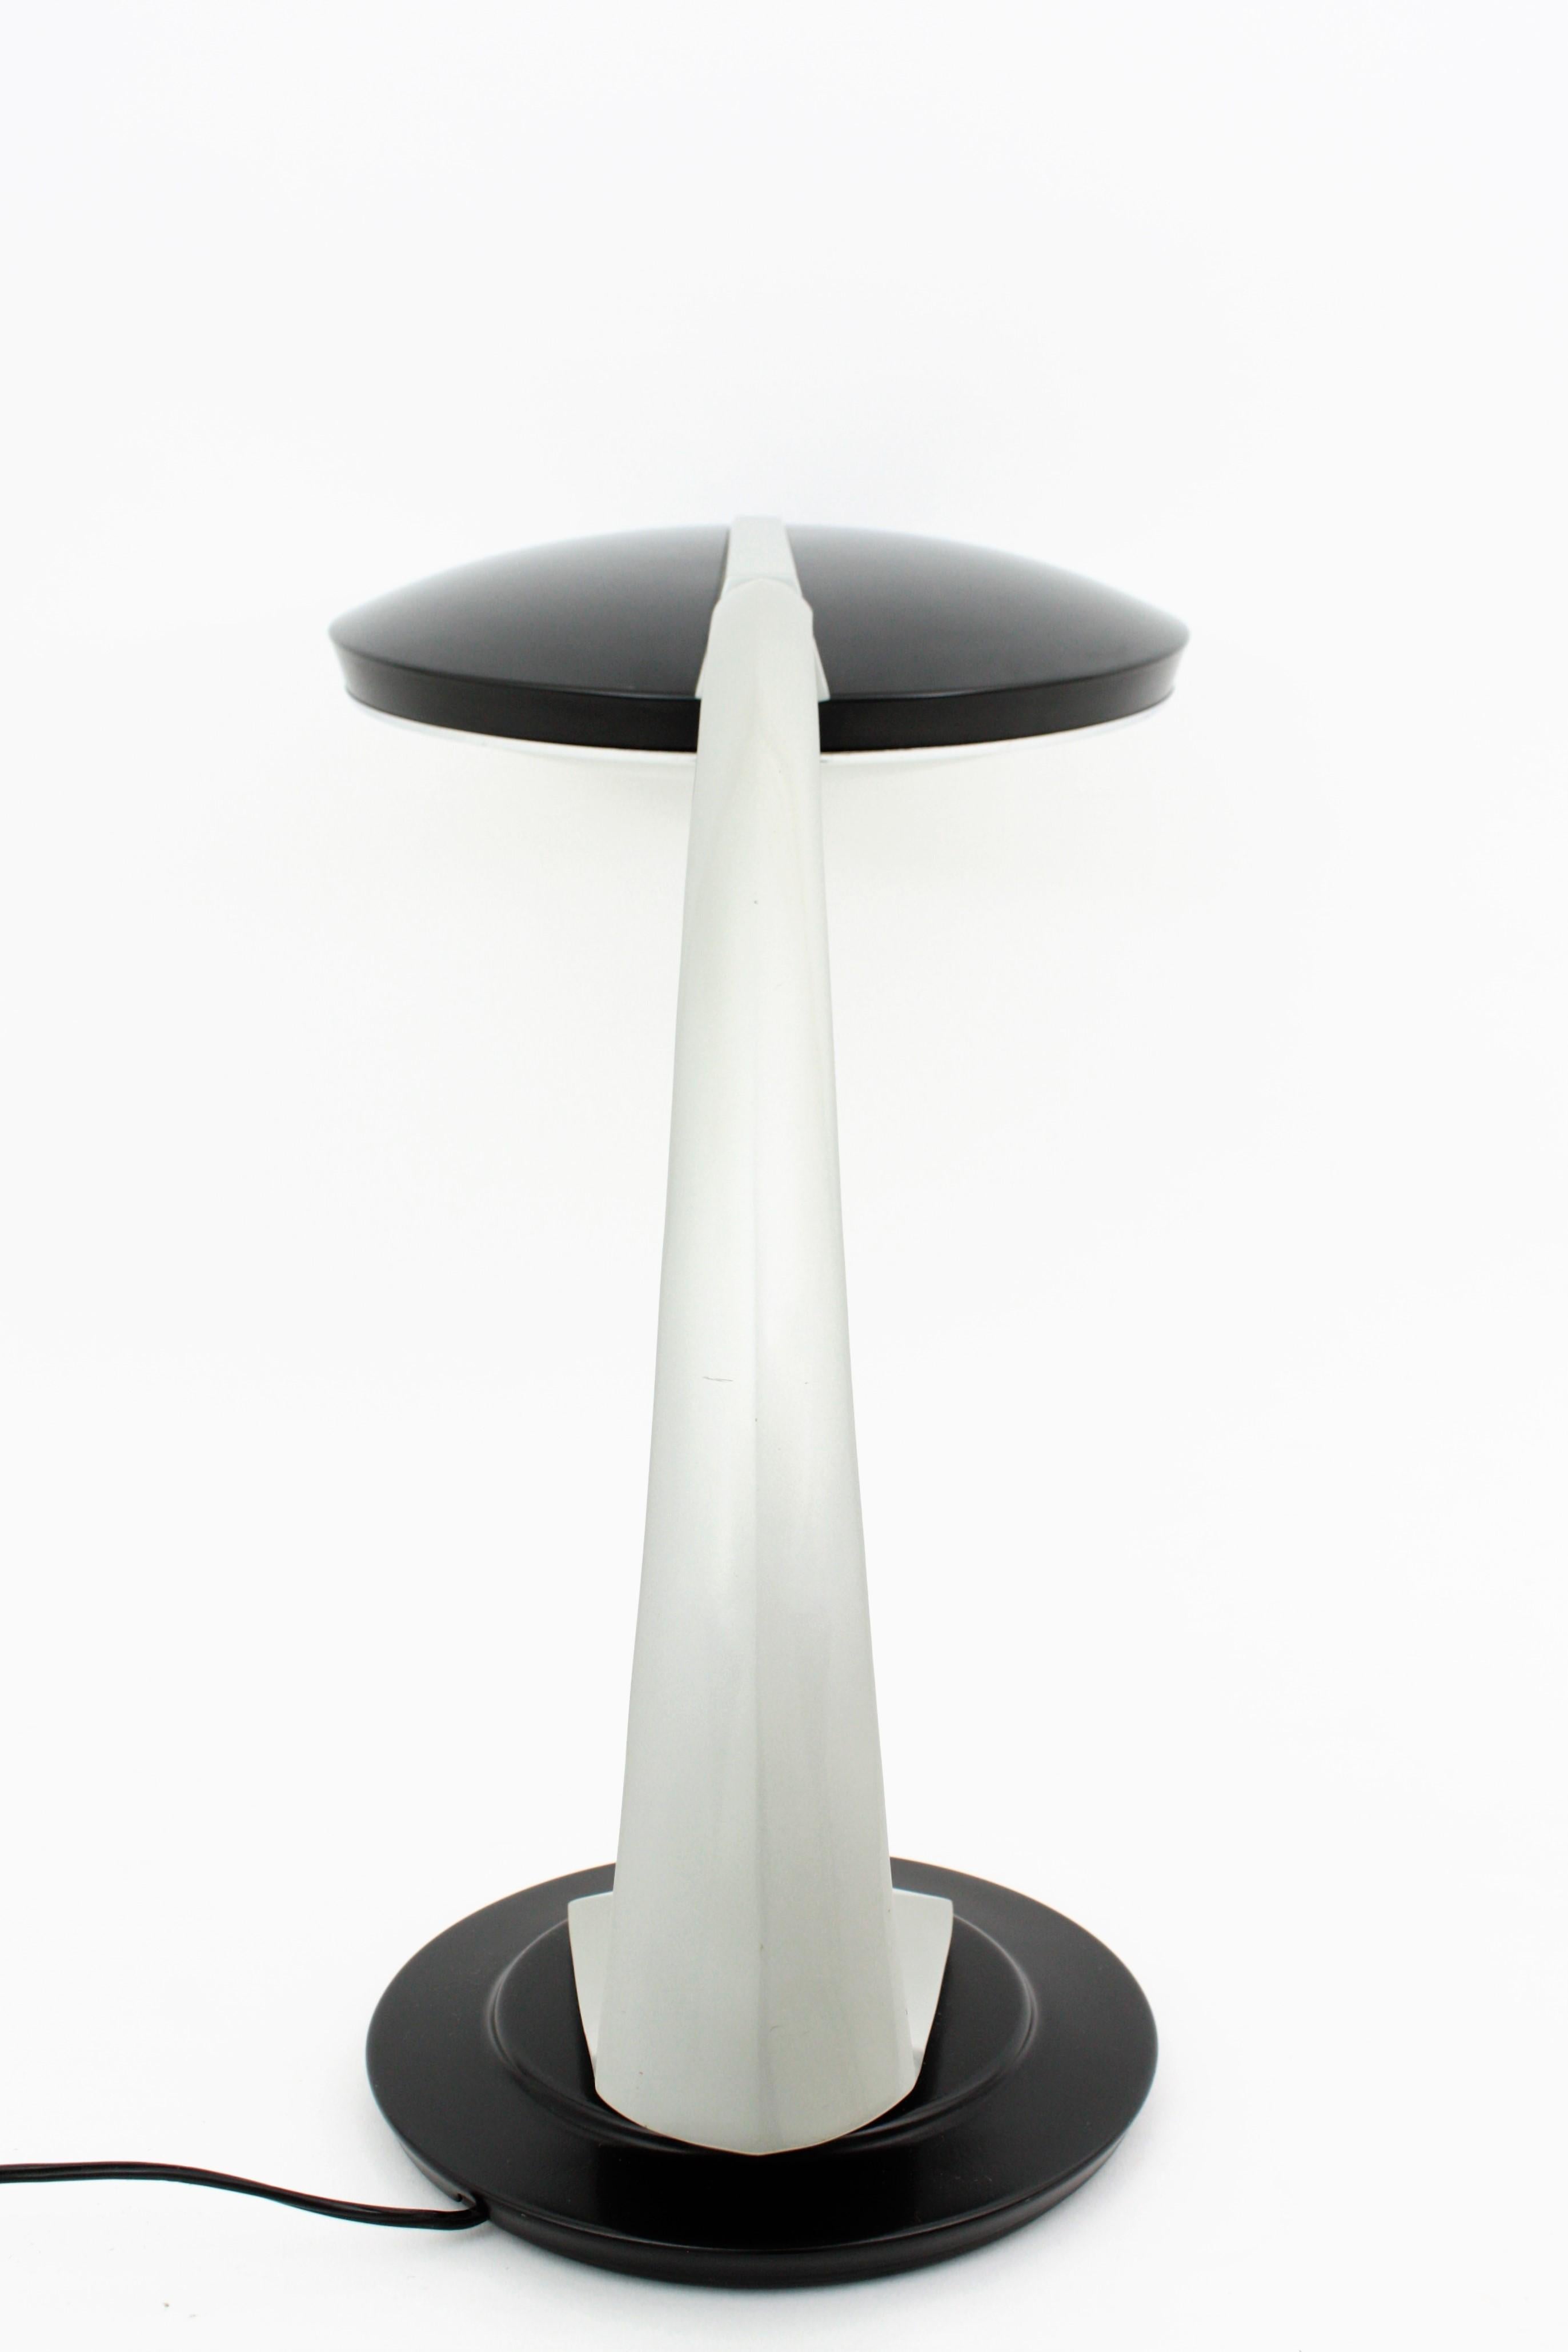 Fase Boomerang 2000 Black and Grey Table Lamp, 1960s For Sale 4